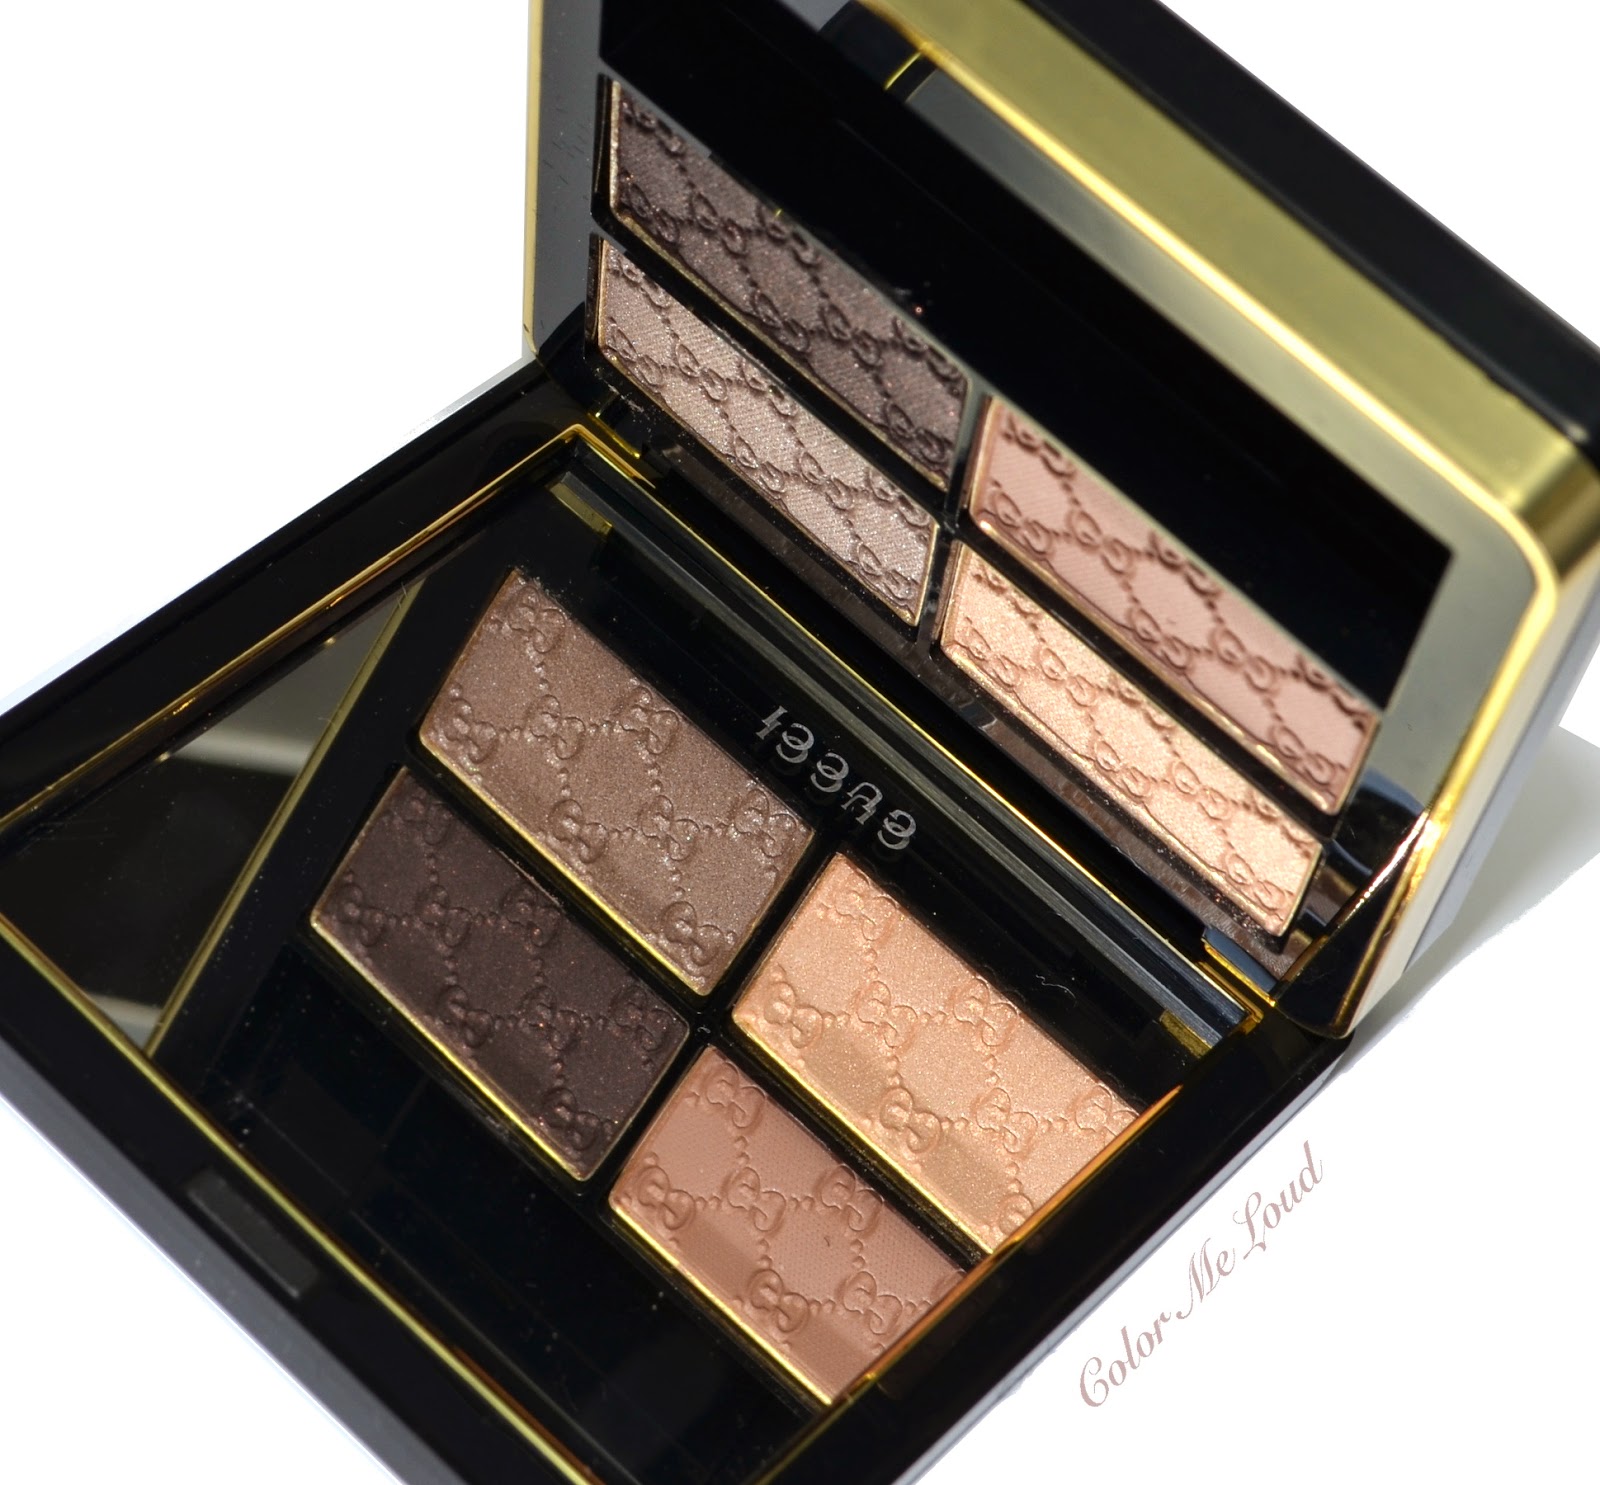 Gucci Beauty Magnetic Color Shadow Quad • Eye Palette Review